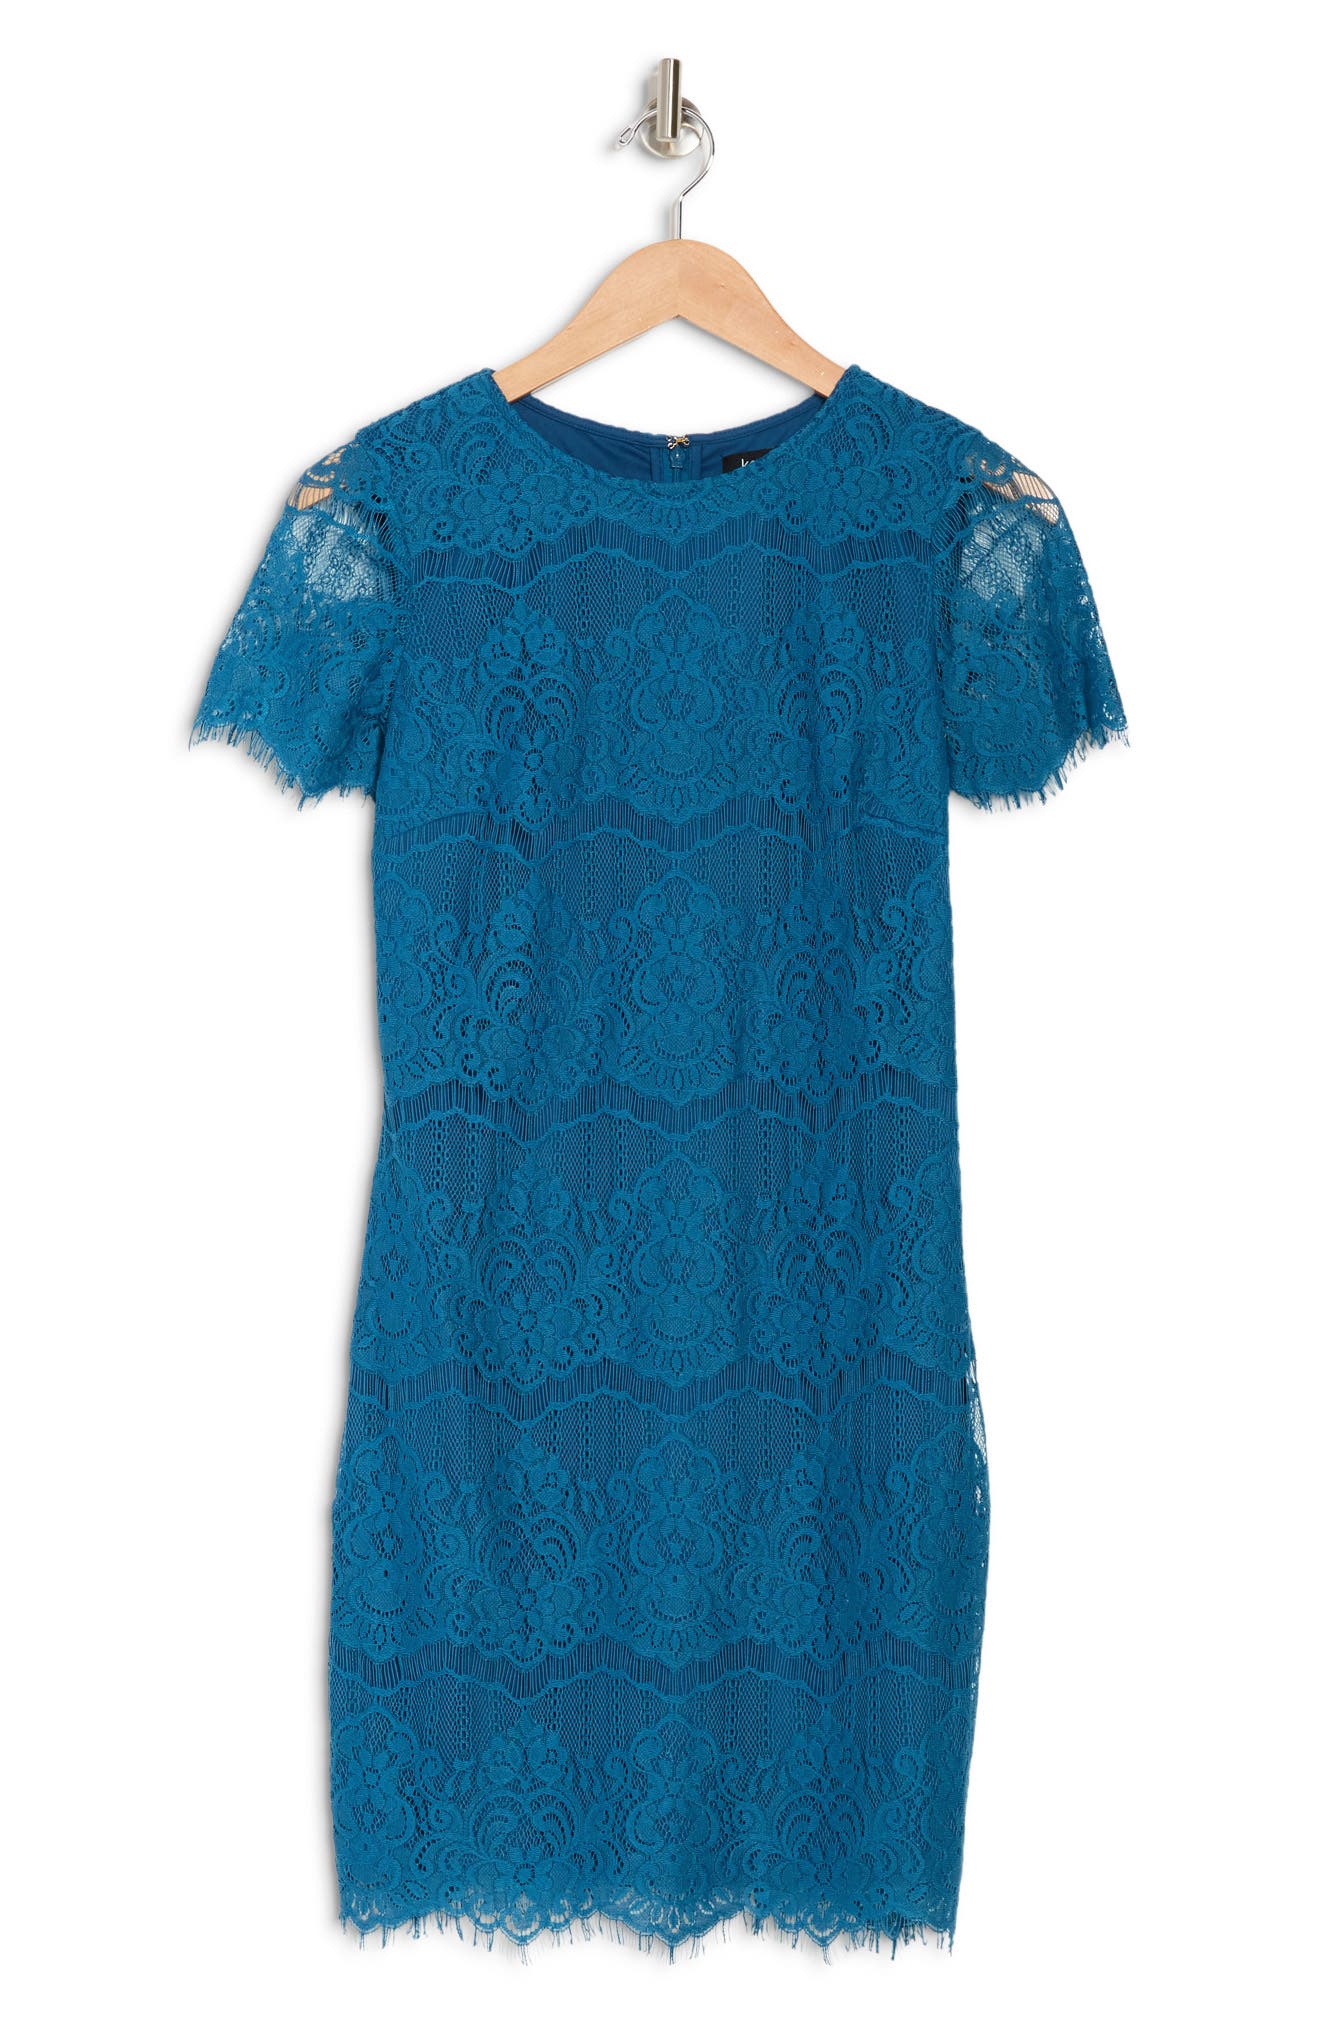 Kensie Scalloped Short Sleeve Lace Dress In Peacock